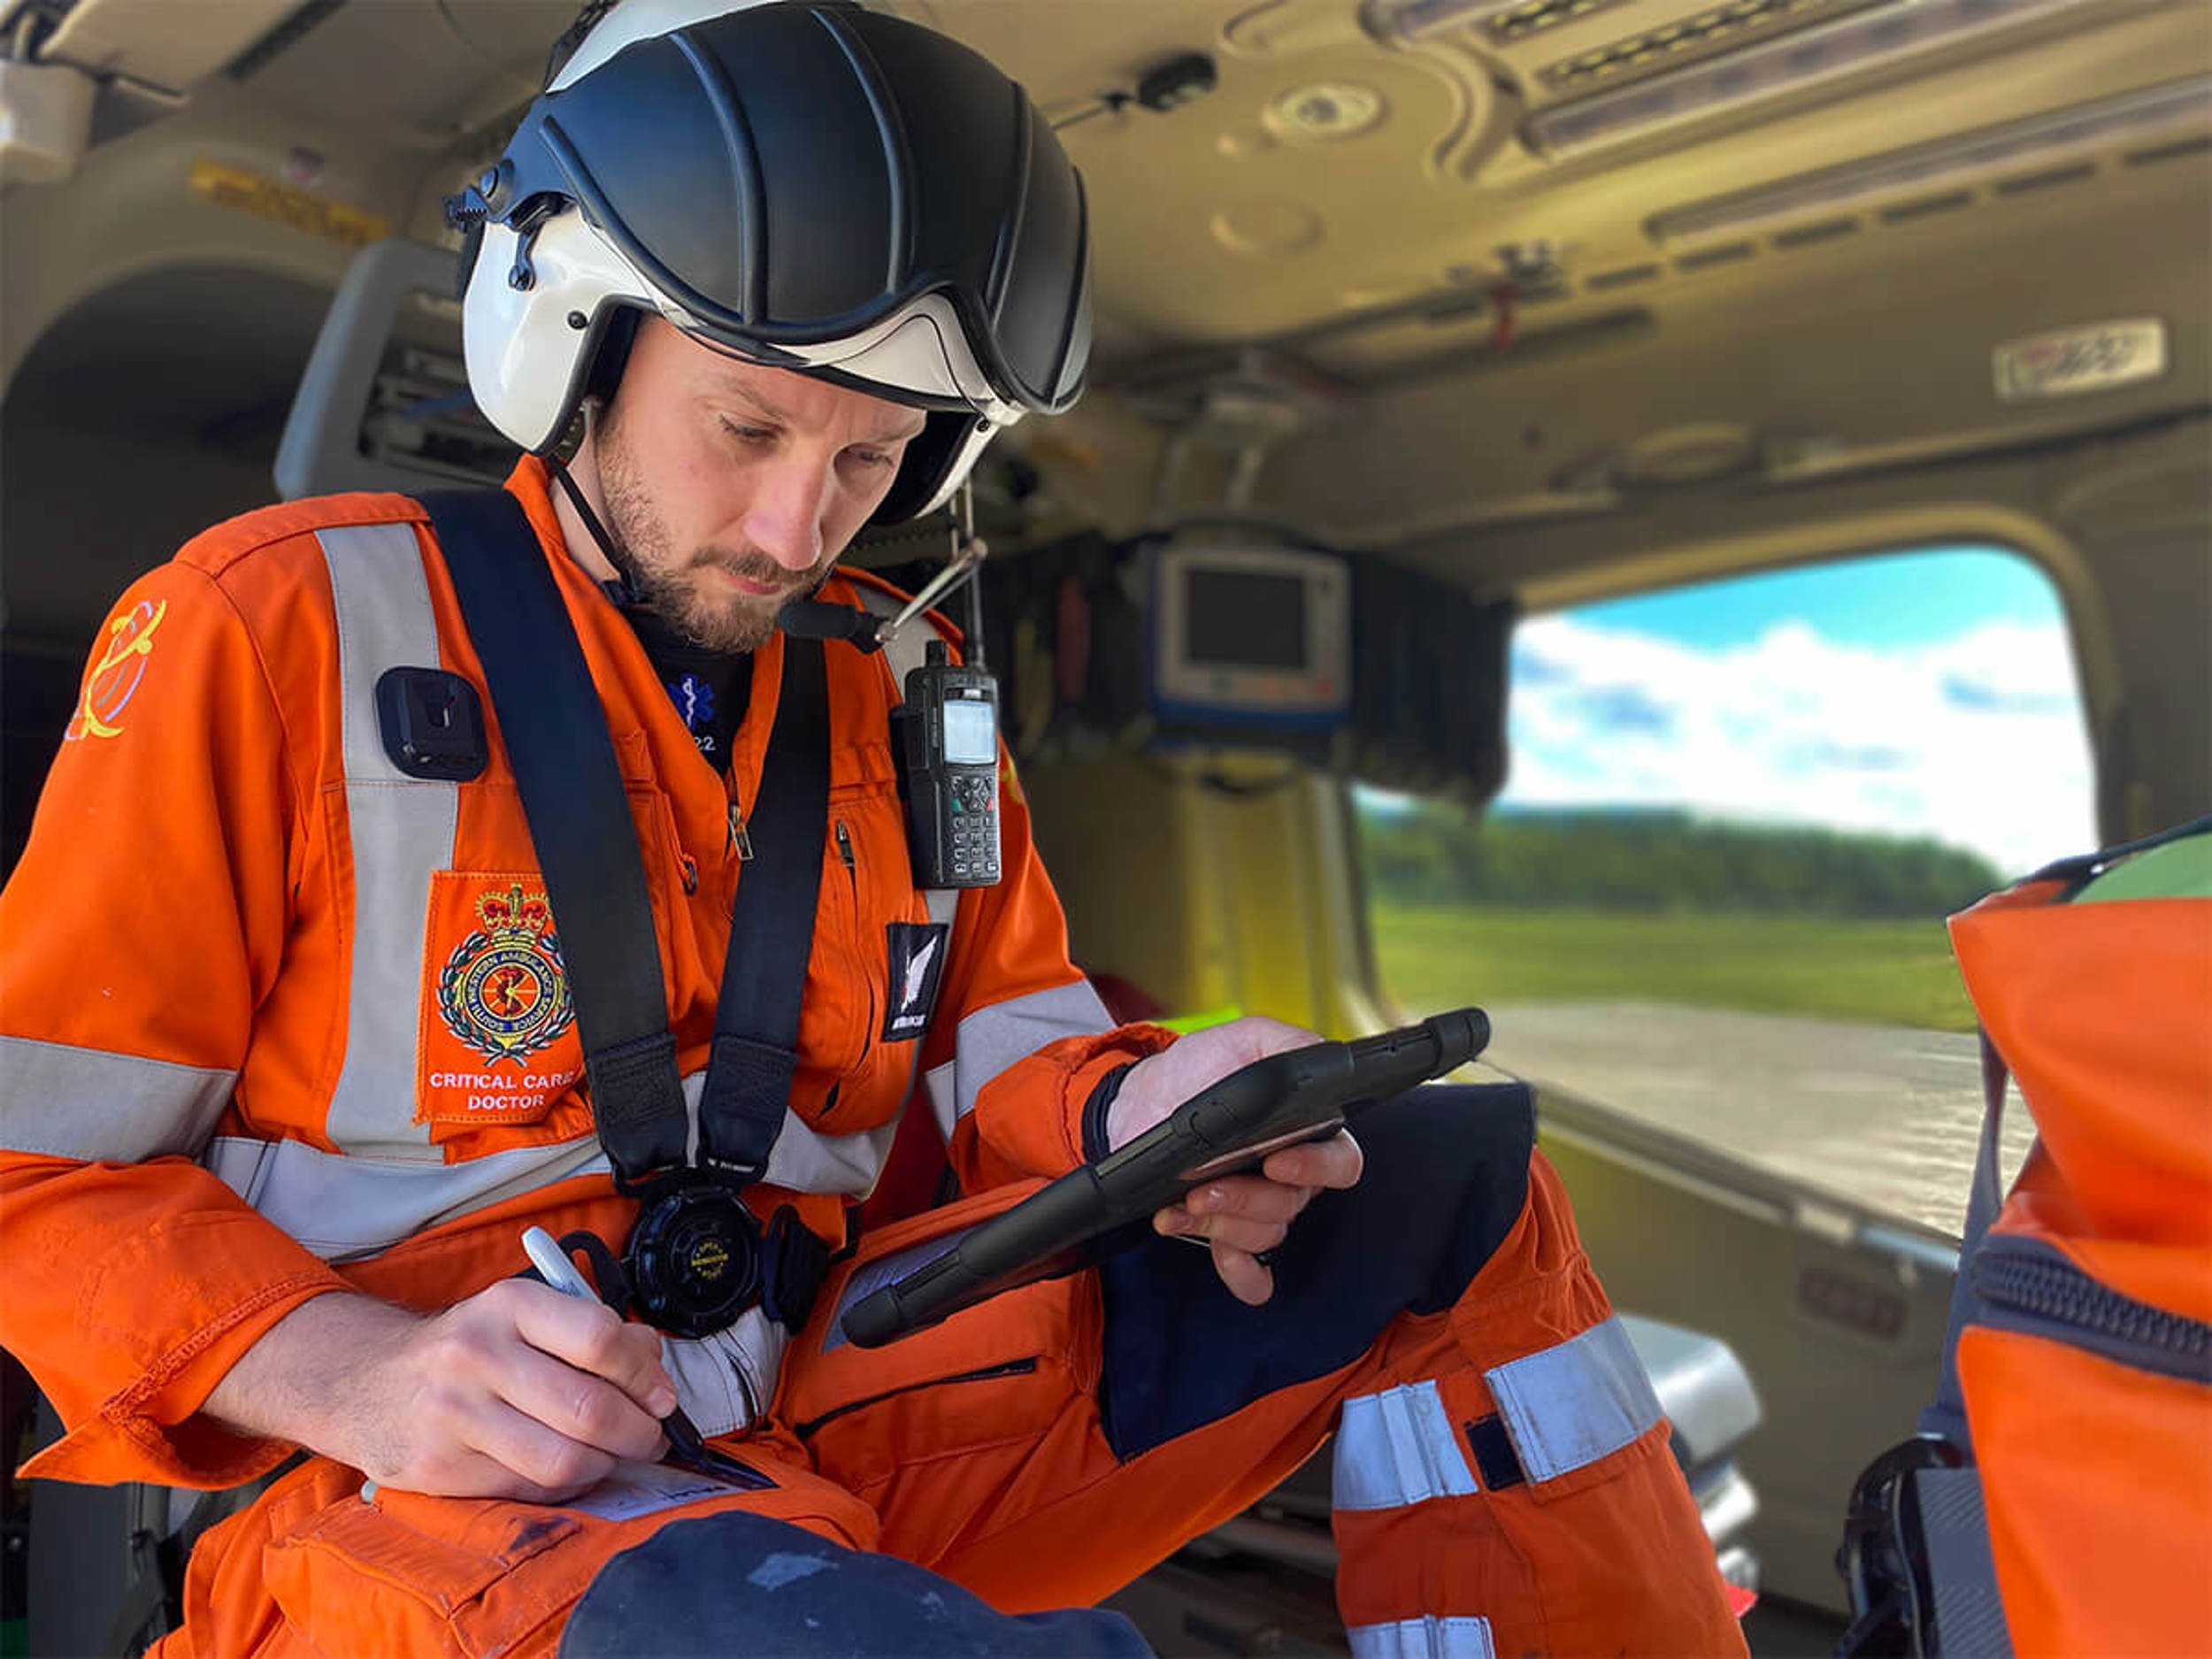 A doctor sat in the back of a helicopter holding an iPad and writing notes